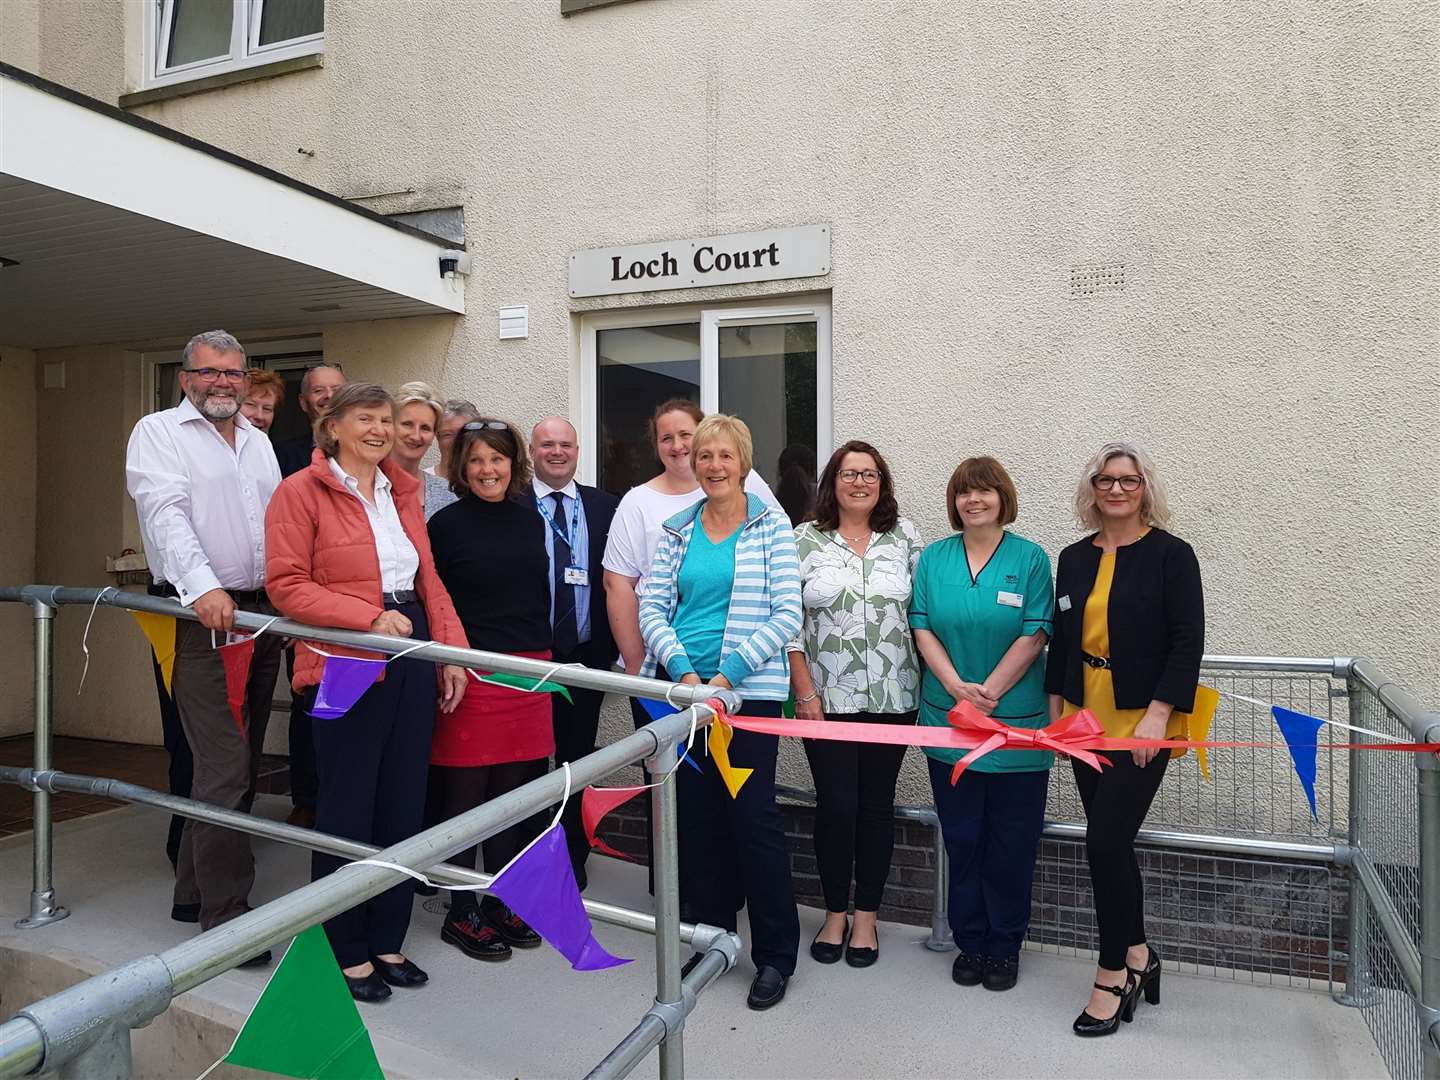 Accommodation team with Raigmore Patients’ Council members Pat Dobbie (second left) and Linda Burgin (fourth right), as well as NHS Highland chief executive Iain Stewart (centre).